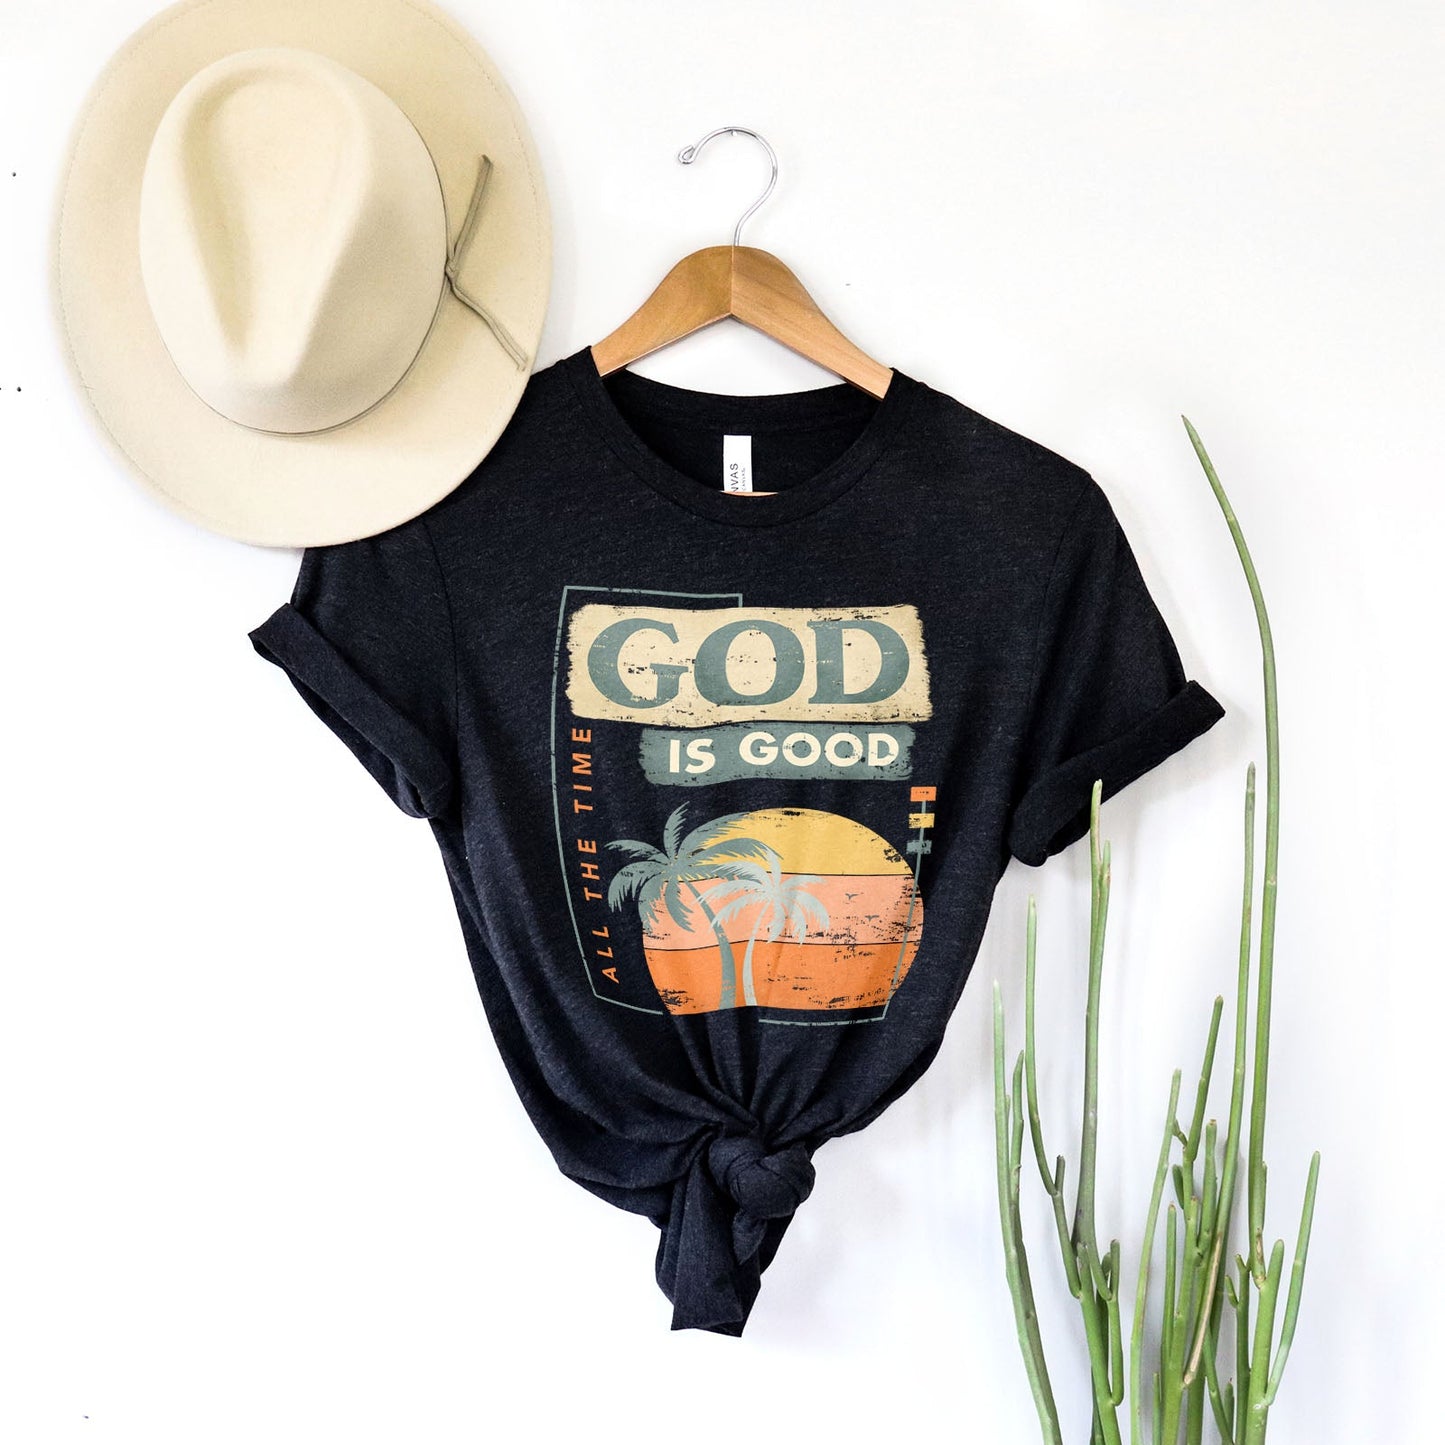 God is Good All The Time Summer Tee Shirts For Women - Christian Shirts for Women - Religious Tee Shirts